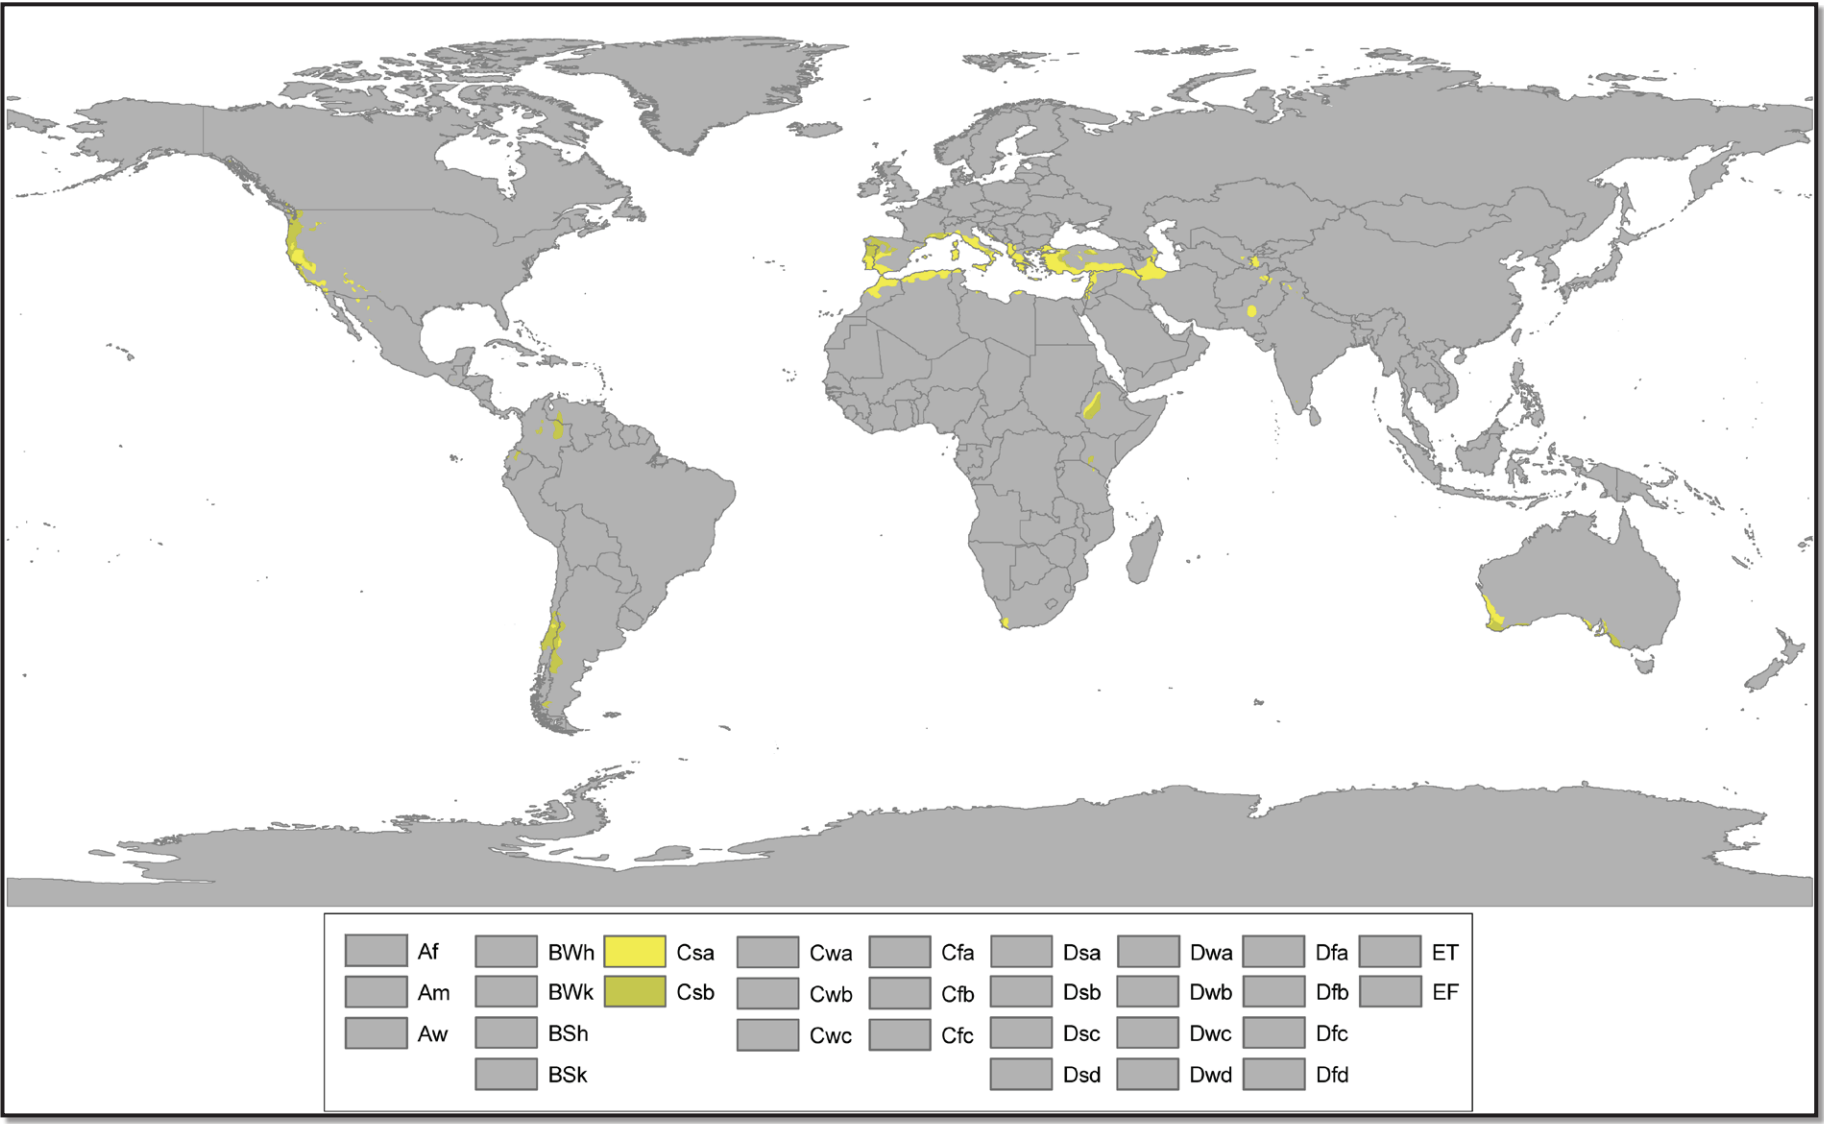 Mediterranean Regions highlighted in yellow on a world map